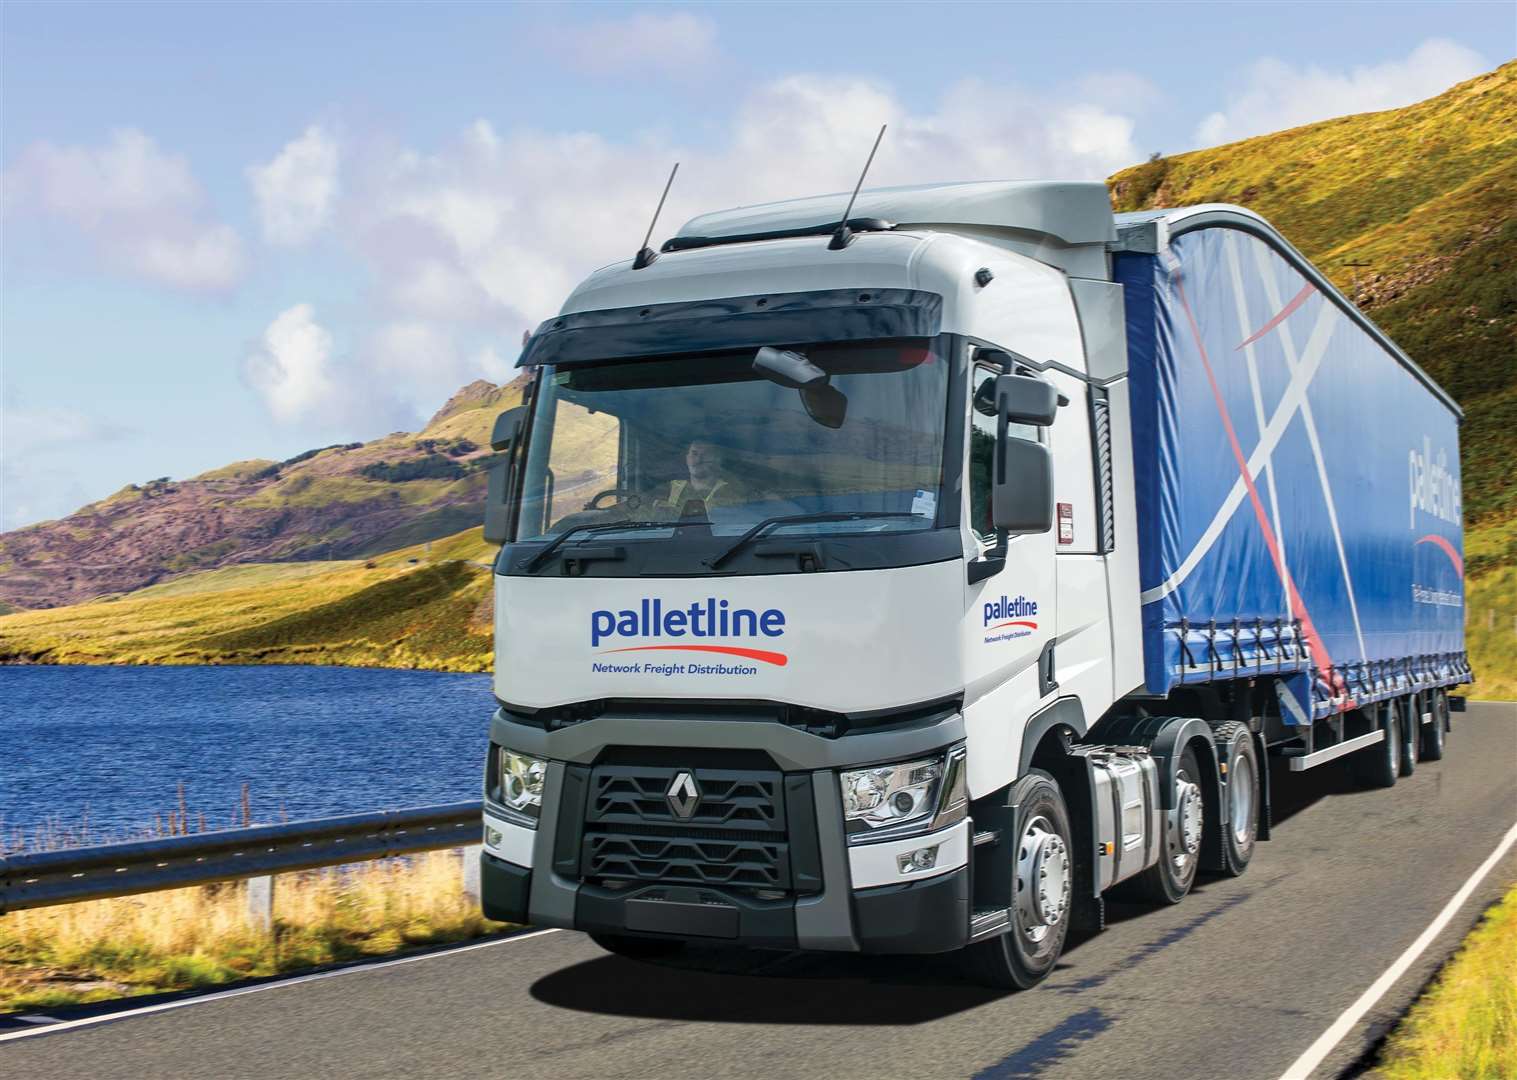 Palletine's next day service to Inverness proves an instant winner with customers,